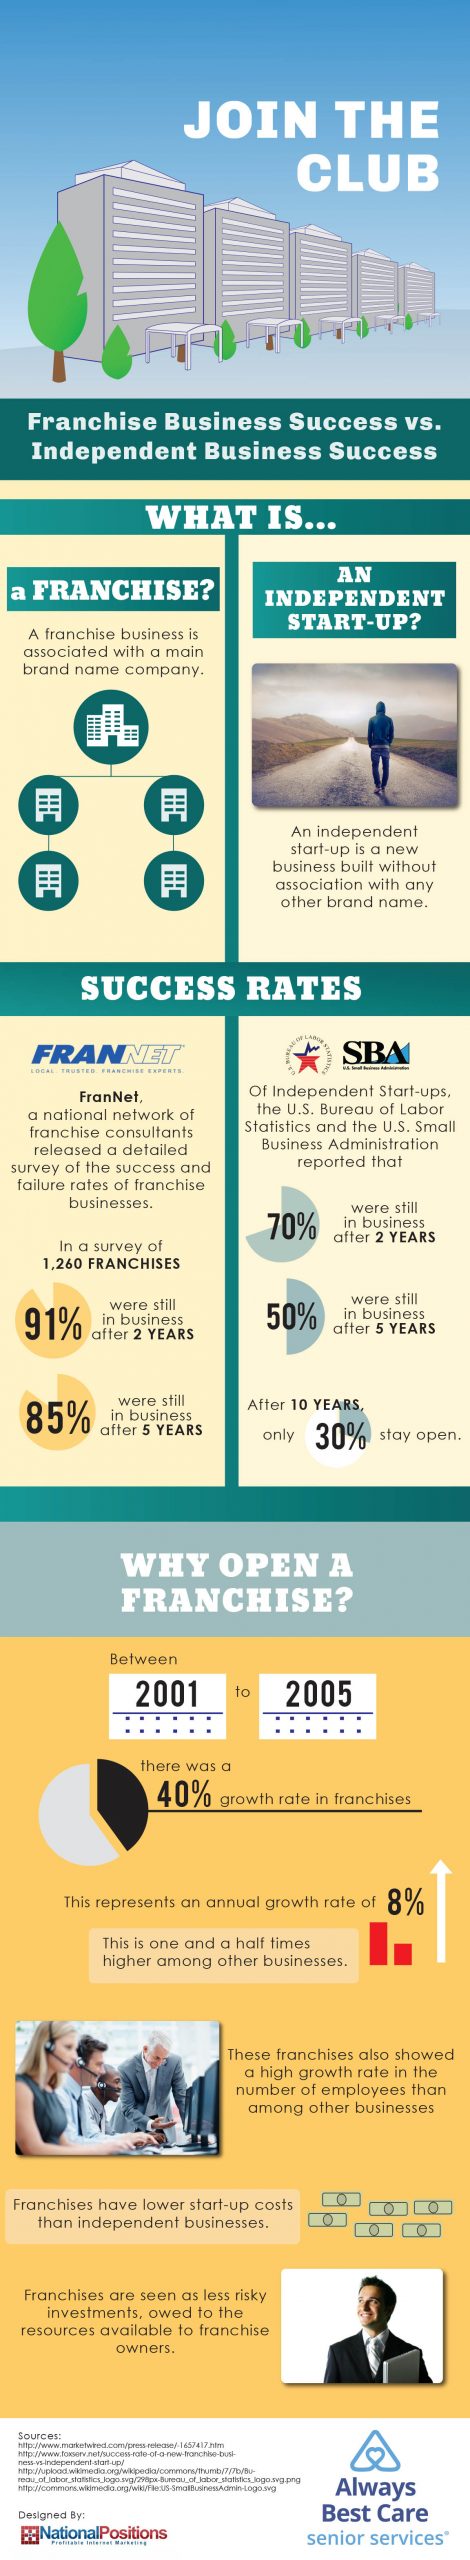 Learn more about the successes of owning a franchise